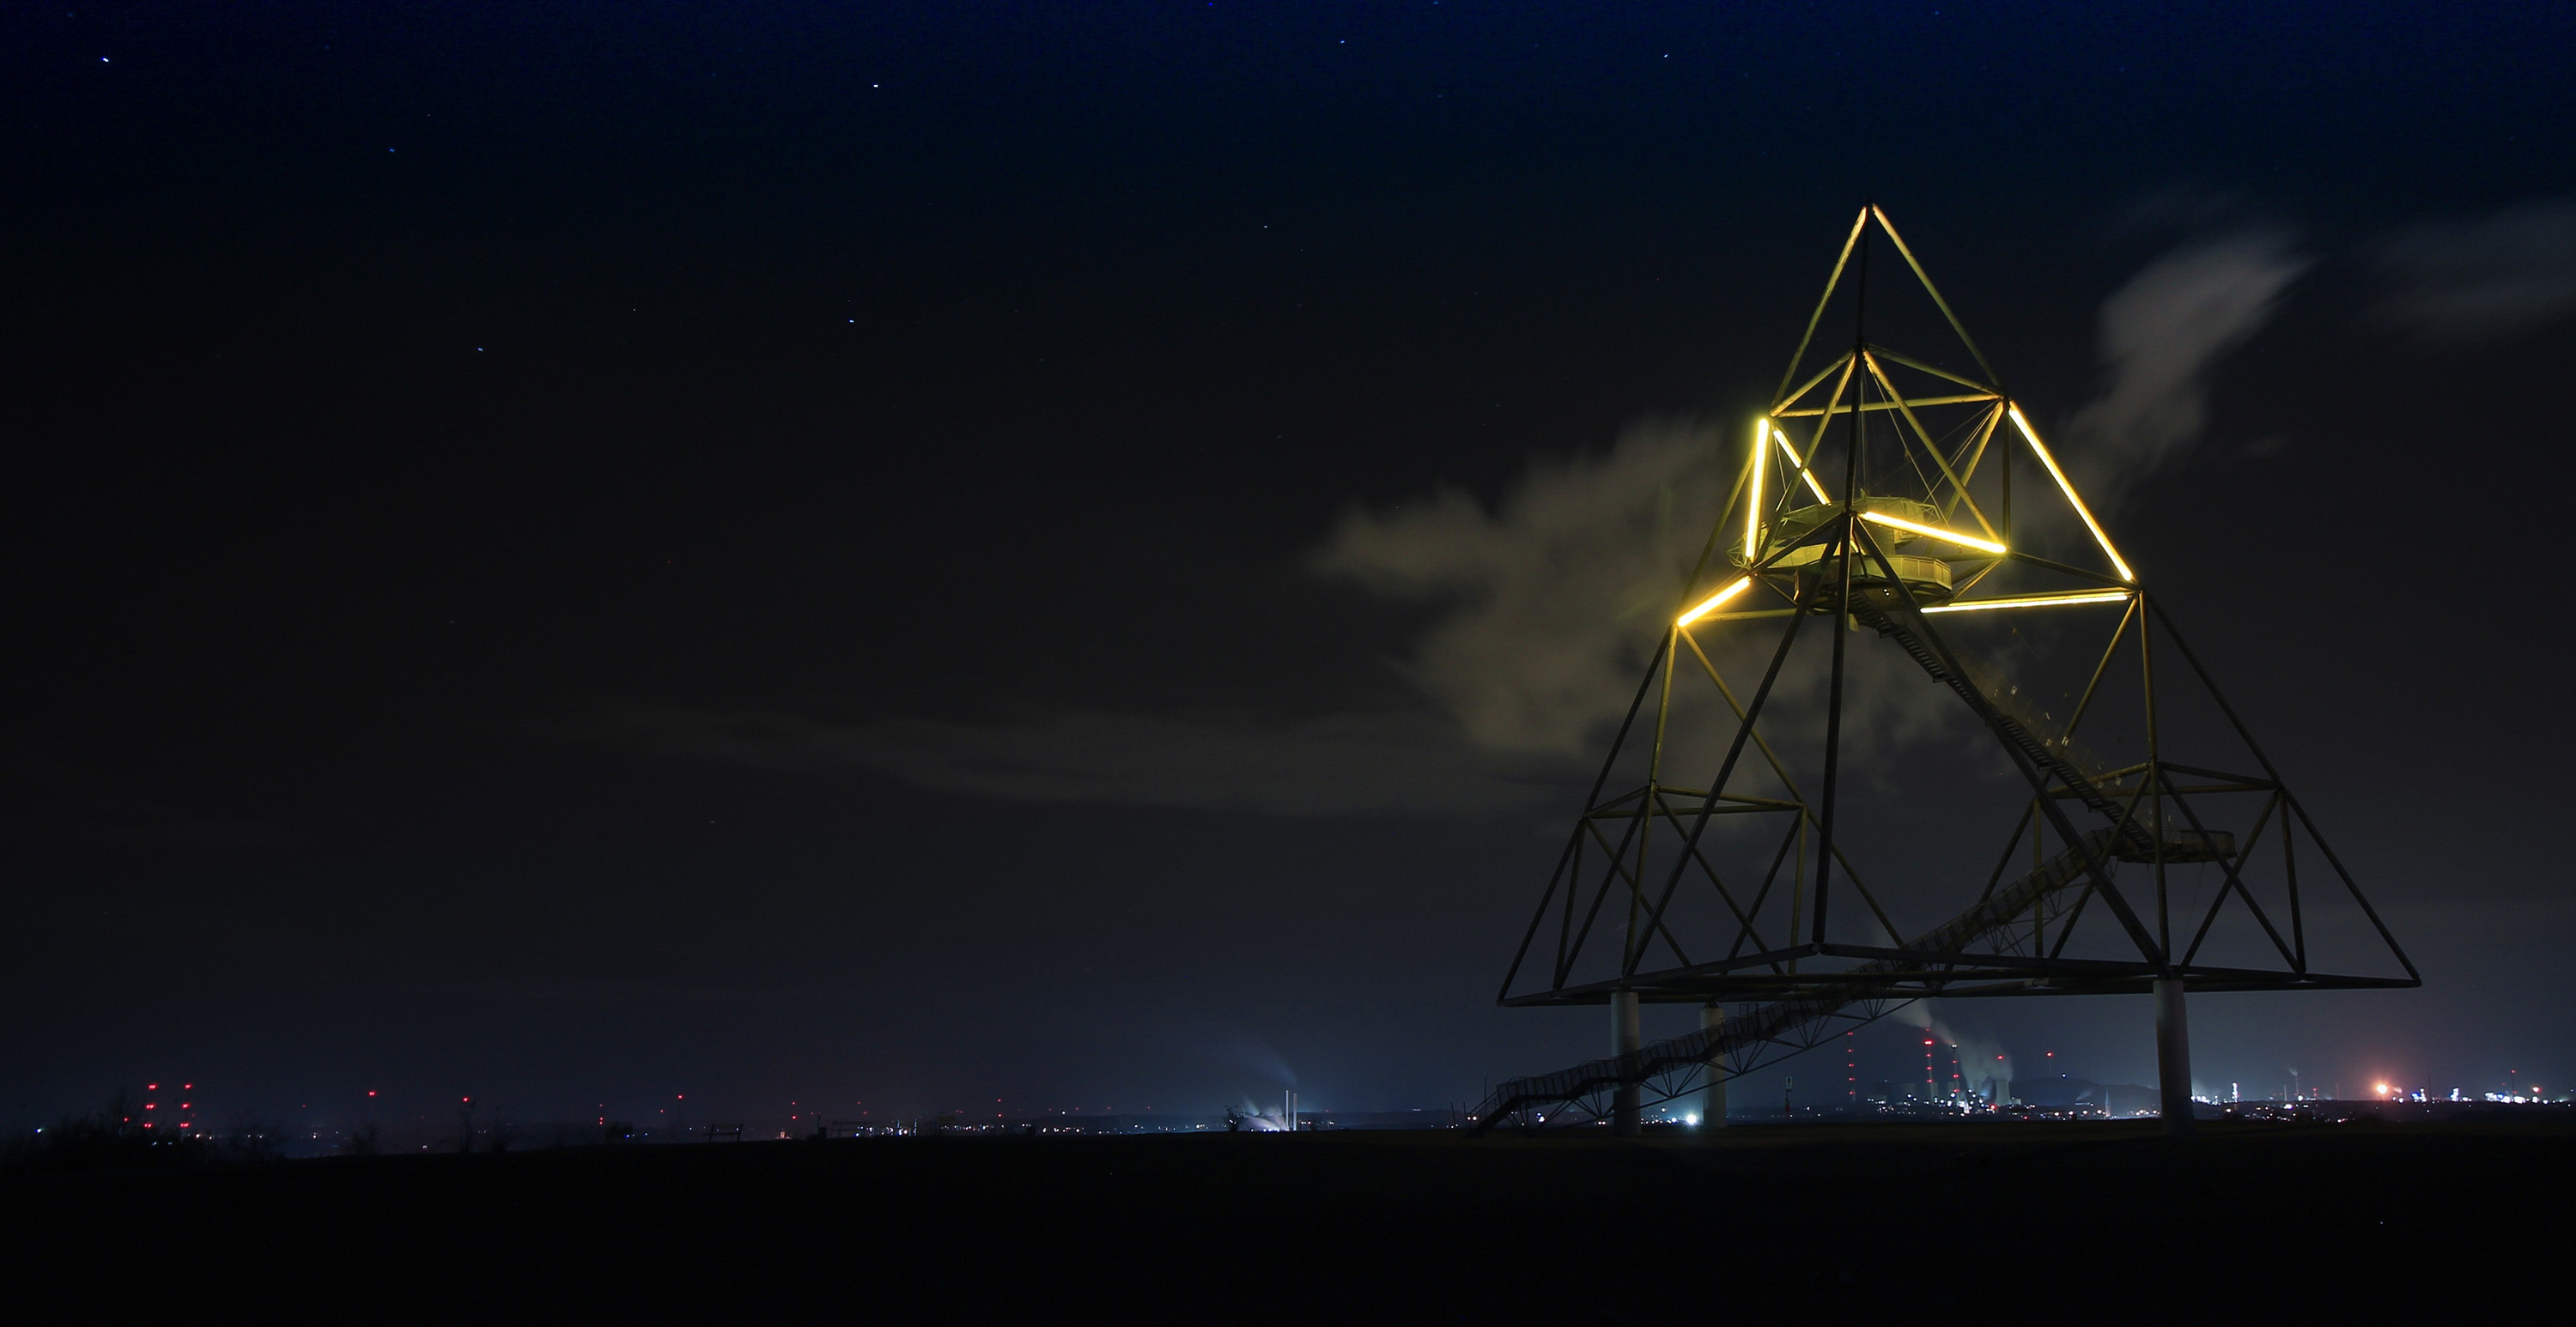 A metallic, star-shaped structure illuminated against a dark night sky. Distant city lights and stars are visible in the background.